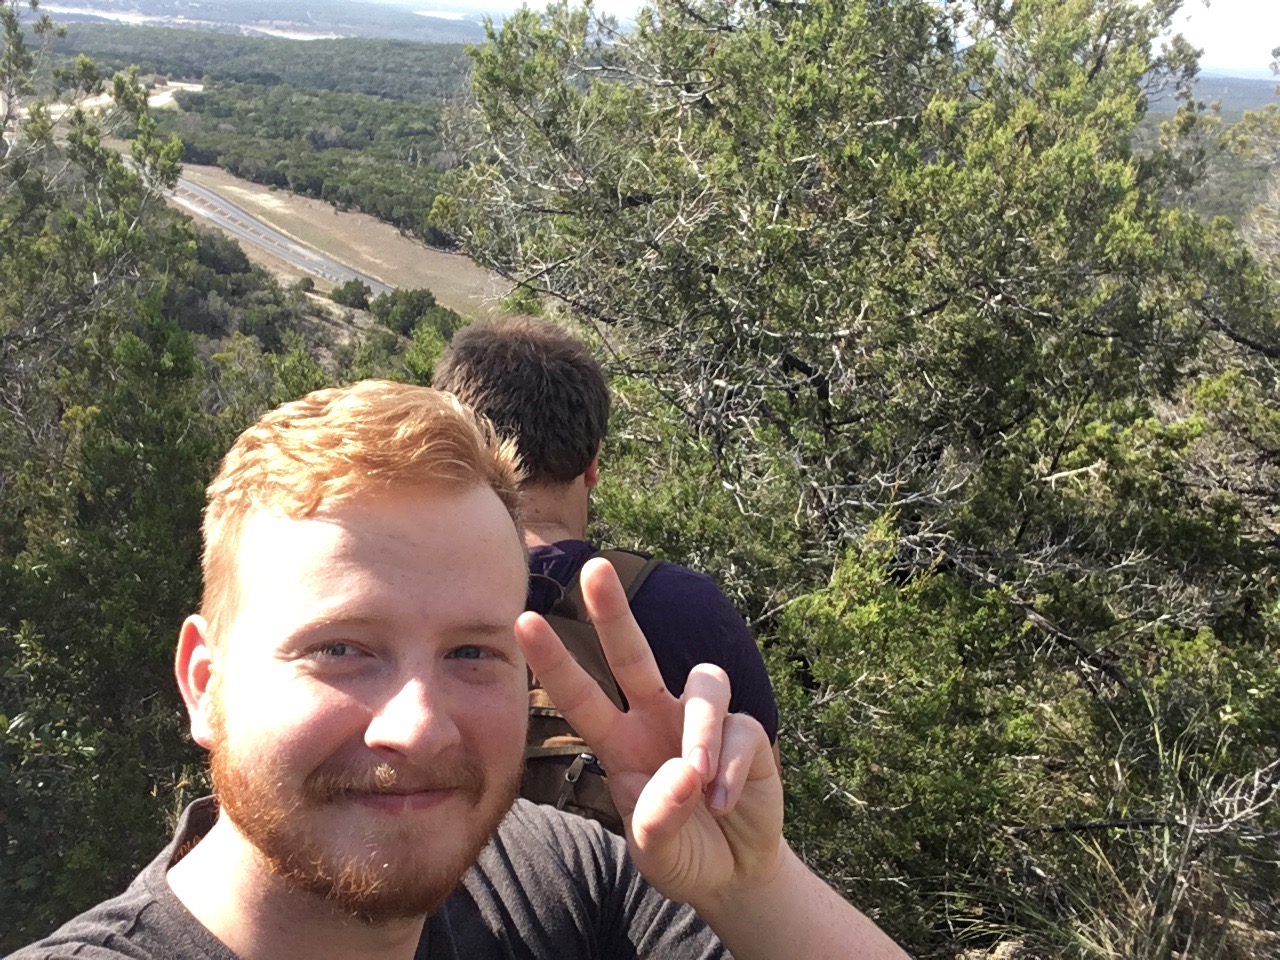 myself in the foreground, with my cousin looking out at the canyon